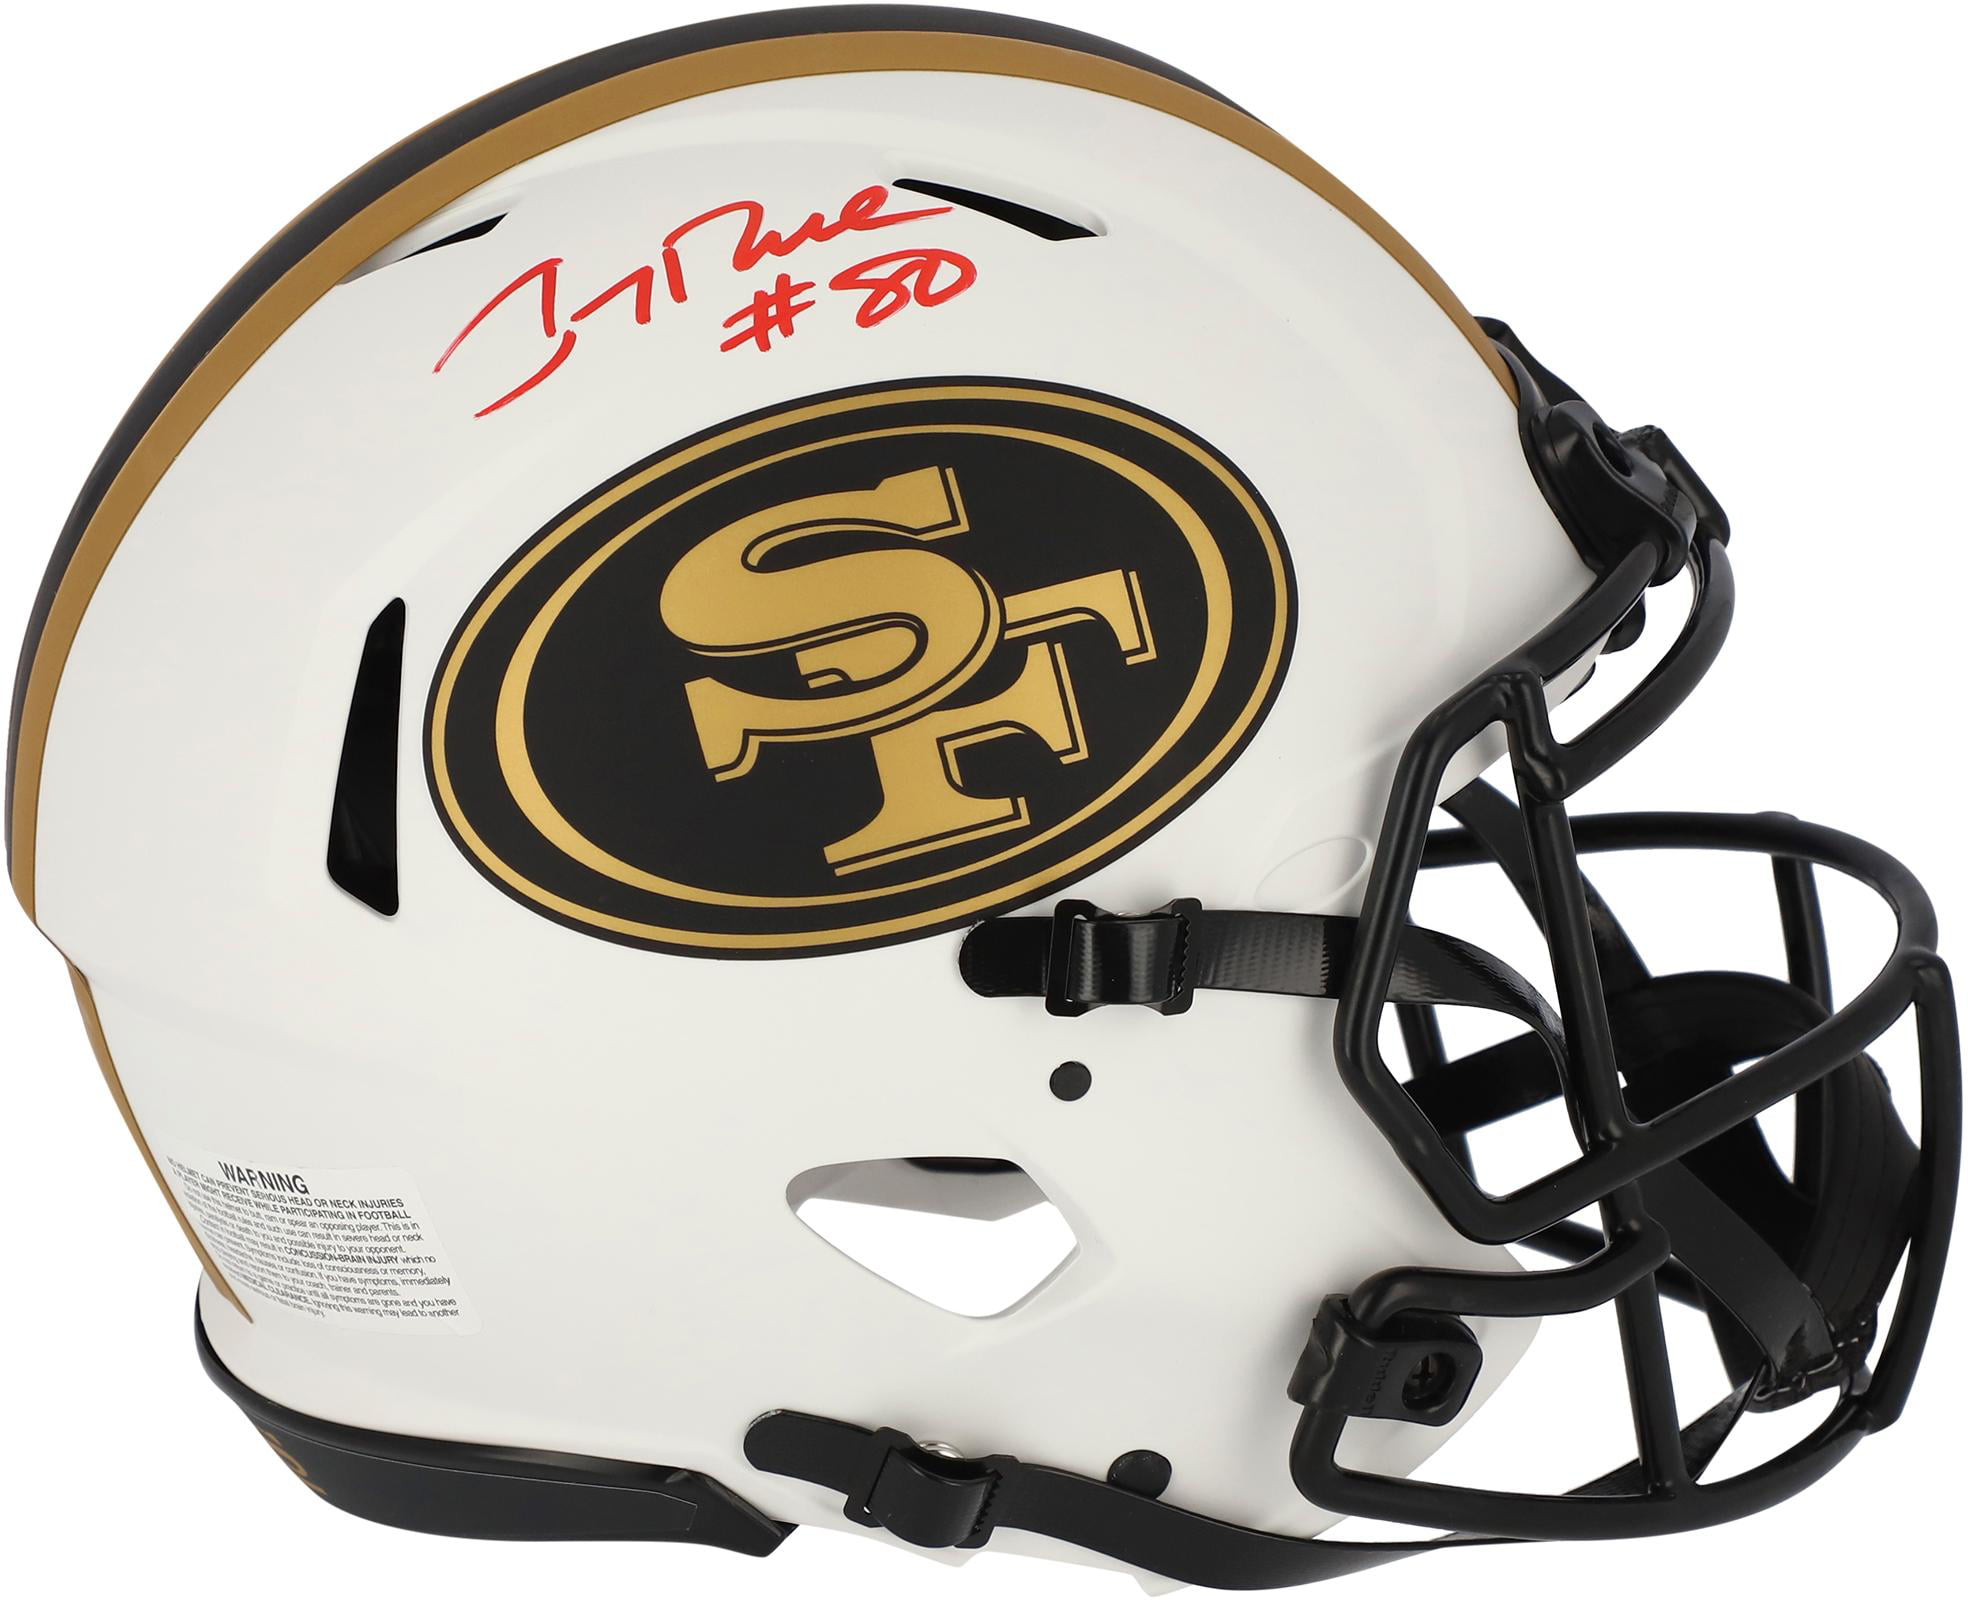 Fanatics Authentic Certified Dwight Clark San Francisco 49ers Autographed Riddell Pro-Line Helmet withDrawn Play Inscription 